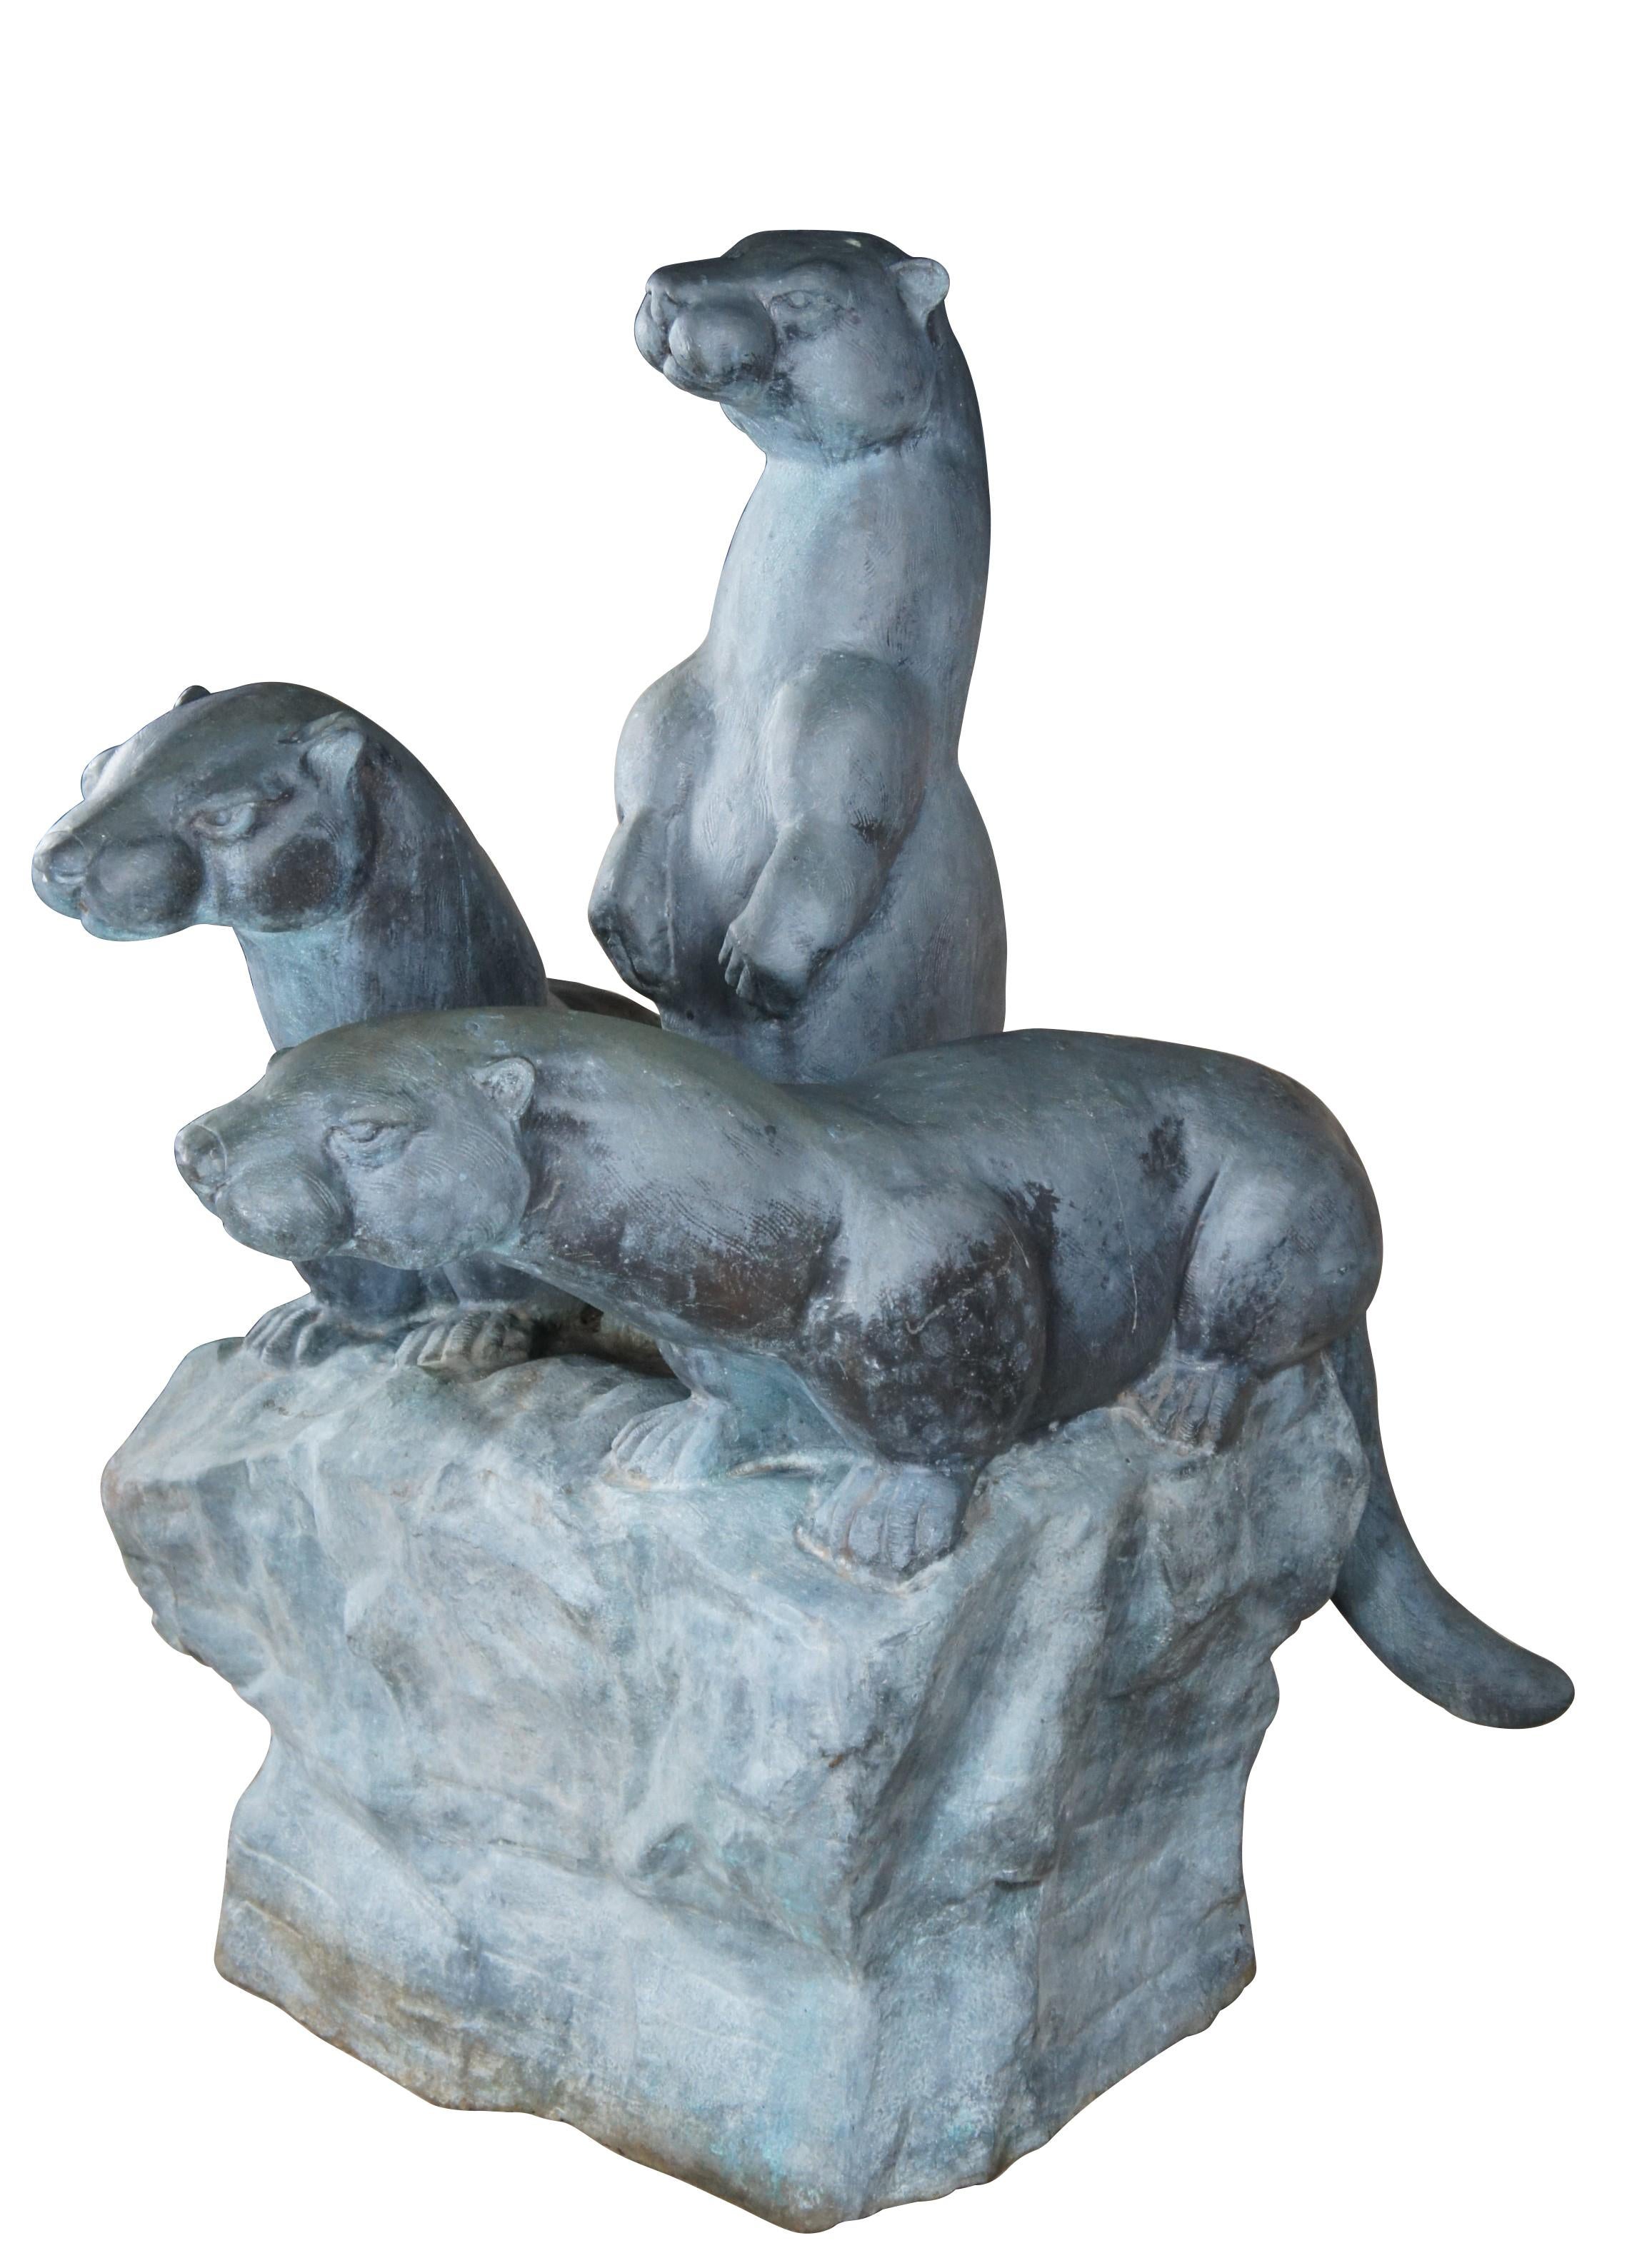 A very large and impressive Max Turner fountain statue.  Made out of bronze featuring a trio of guardian Otters.  Circa 1997.  The otter symbolizes friendship, peace, kindness and family. The otter is also social and mischievous and a symbol of